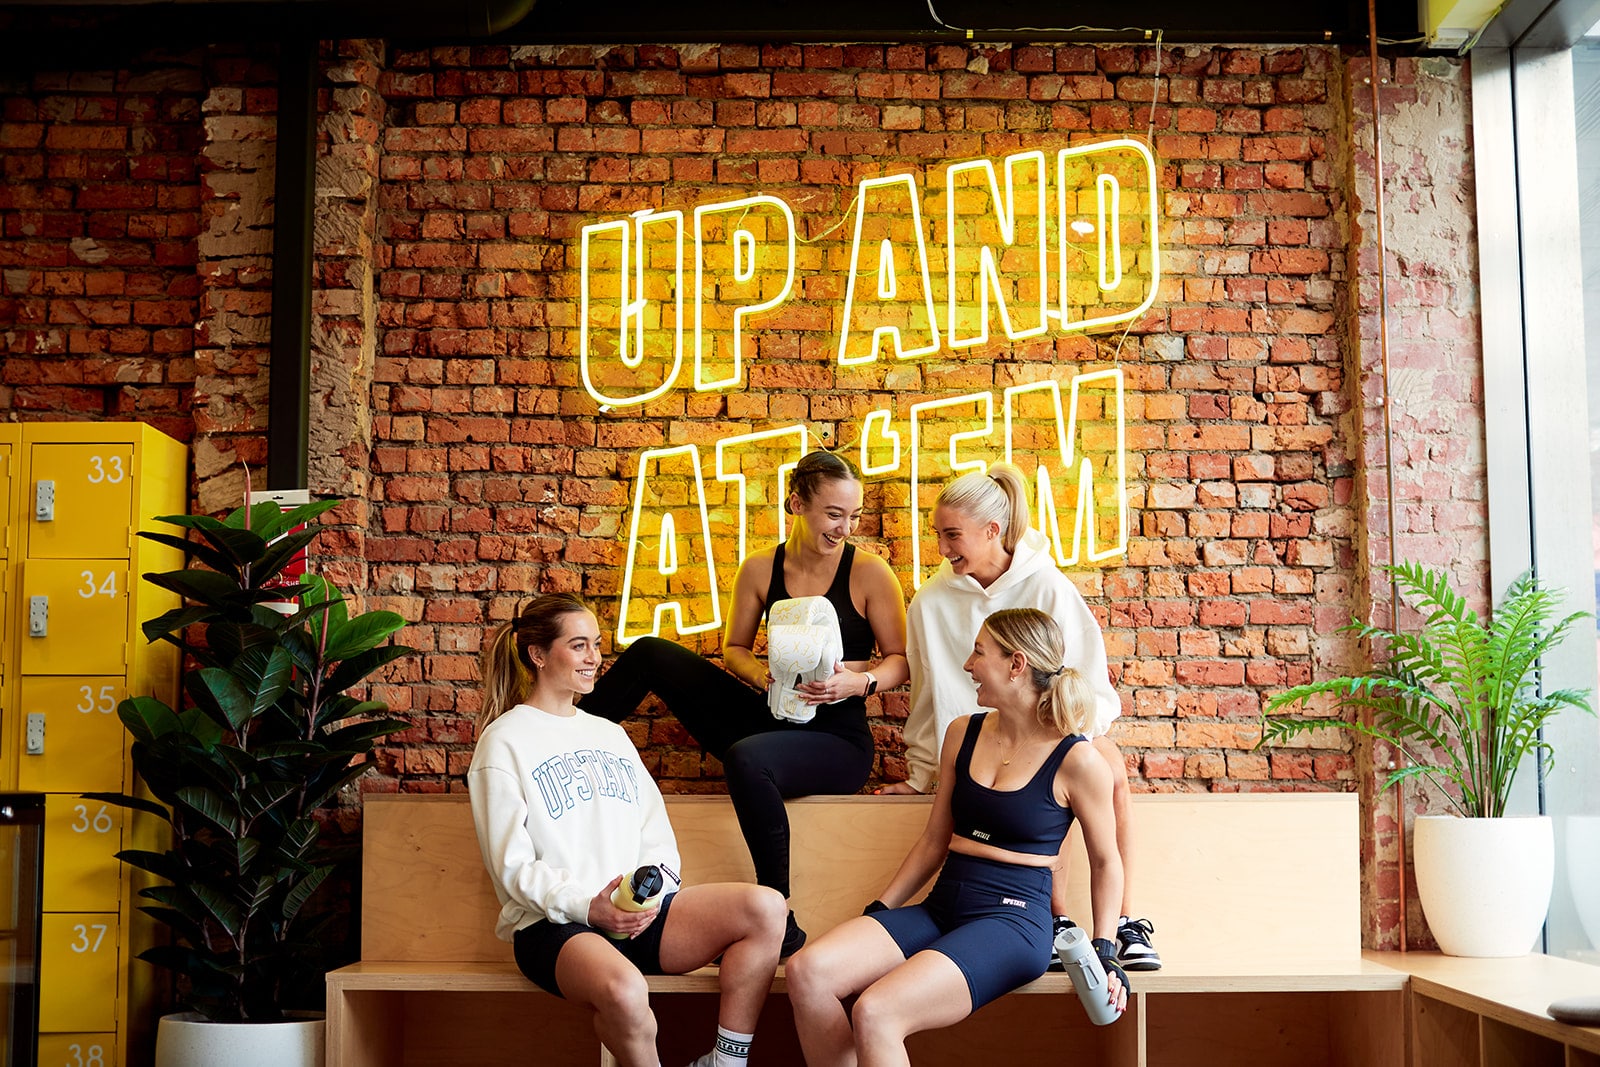 Group of young women who are Upstaters chat happily together in the communal space at Upstate Geelong. The background is a cool industrial chic brick wall with motivating neon signage that reads "UP AND AT 'EM'.